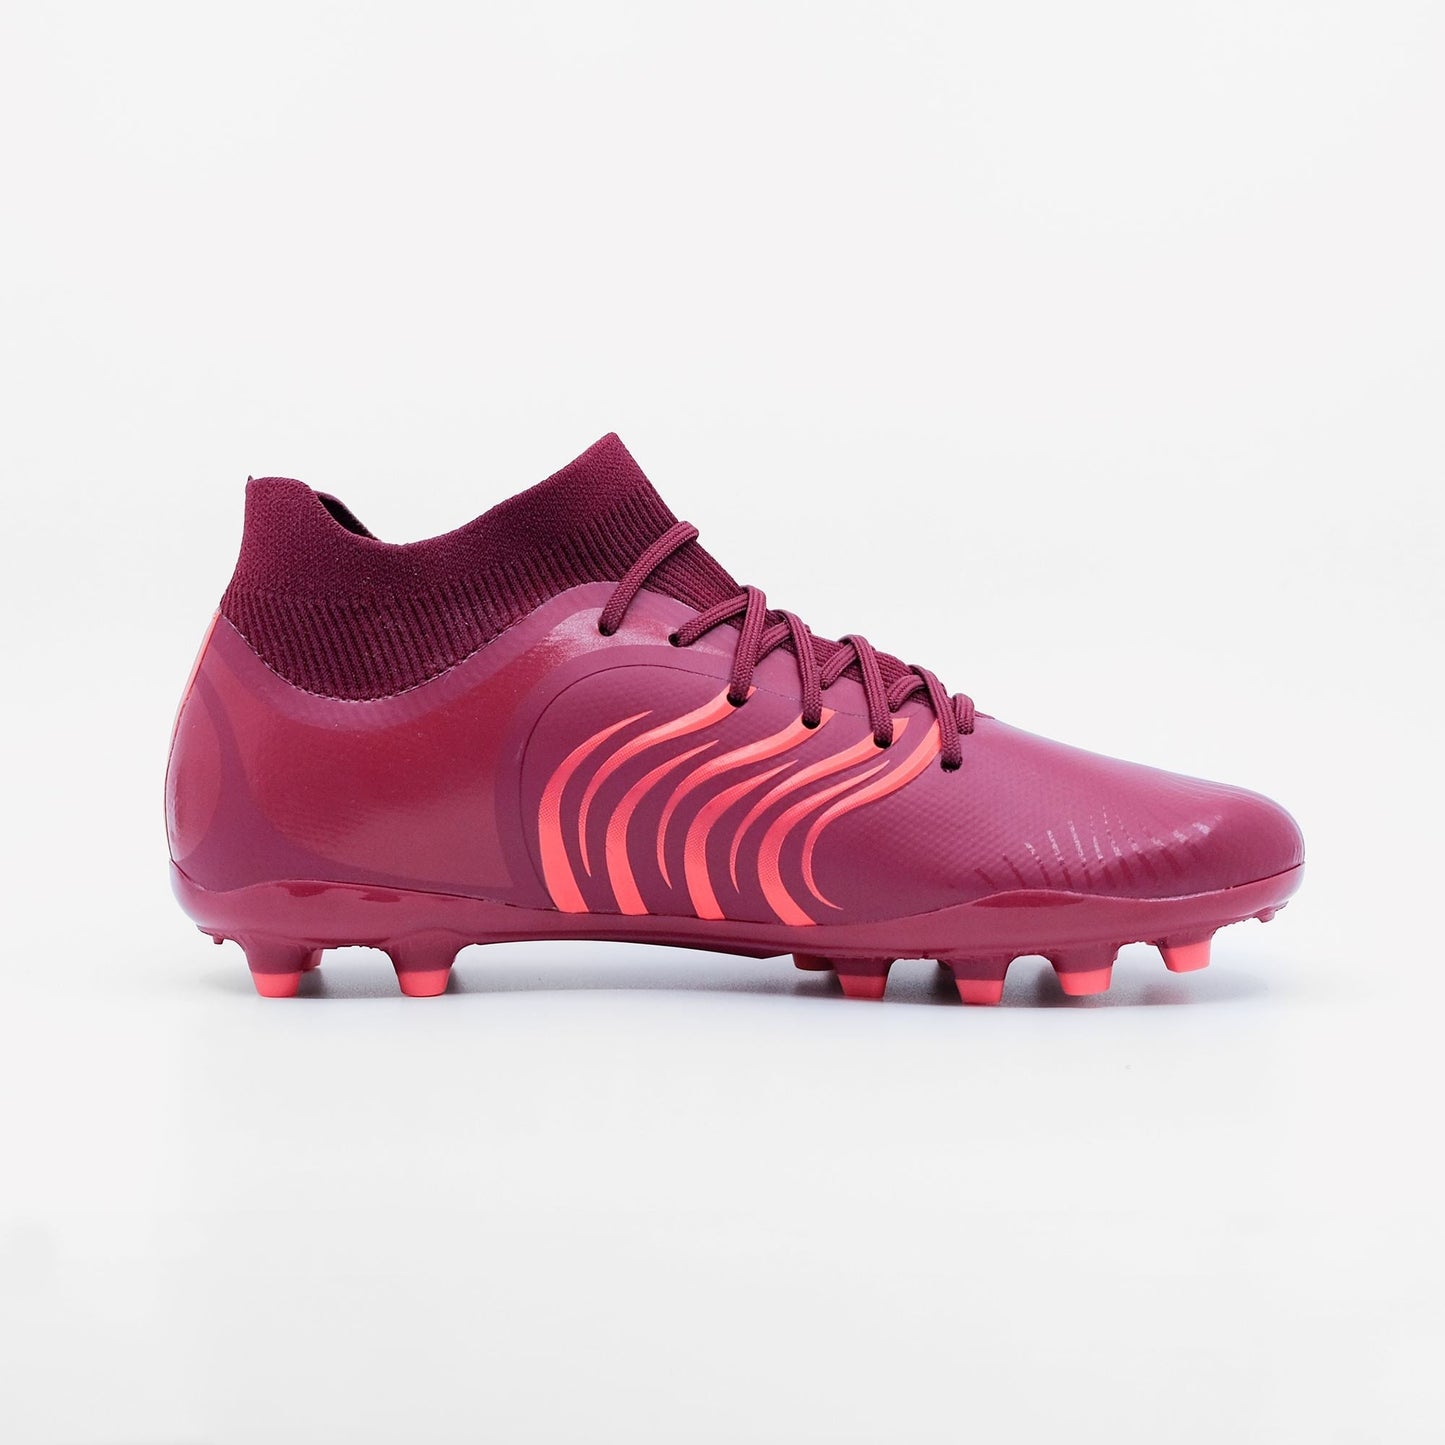 IDA Rise Women's Soccer Cleat, Burgundy, FG/AG, Firm Ground, Artificial Ground, Ankle sock, inside of cleat has light coral wavy stripes